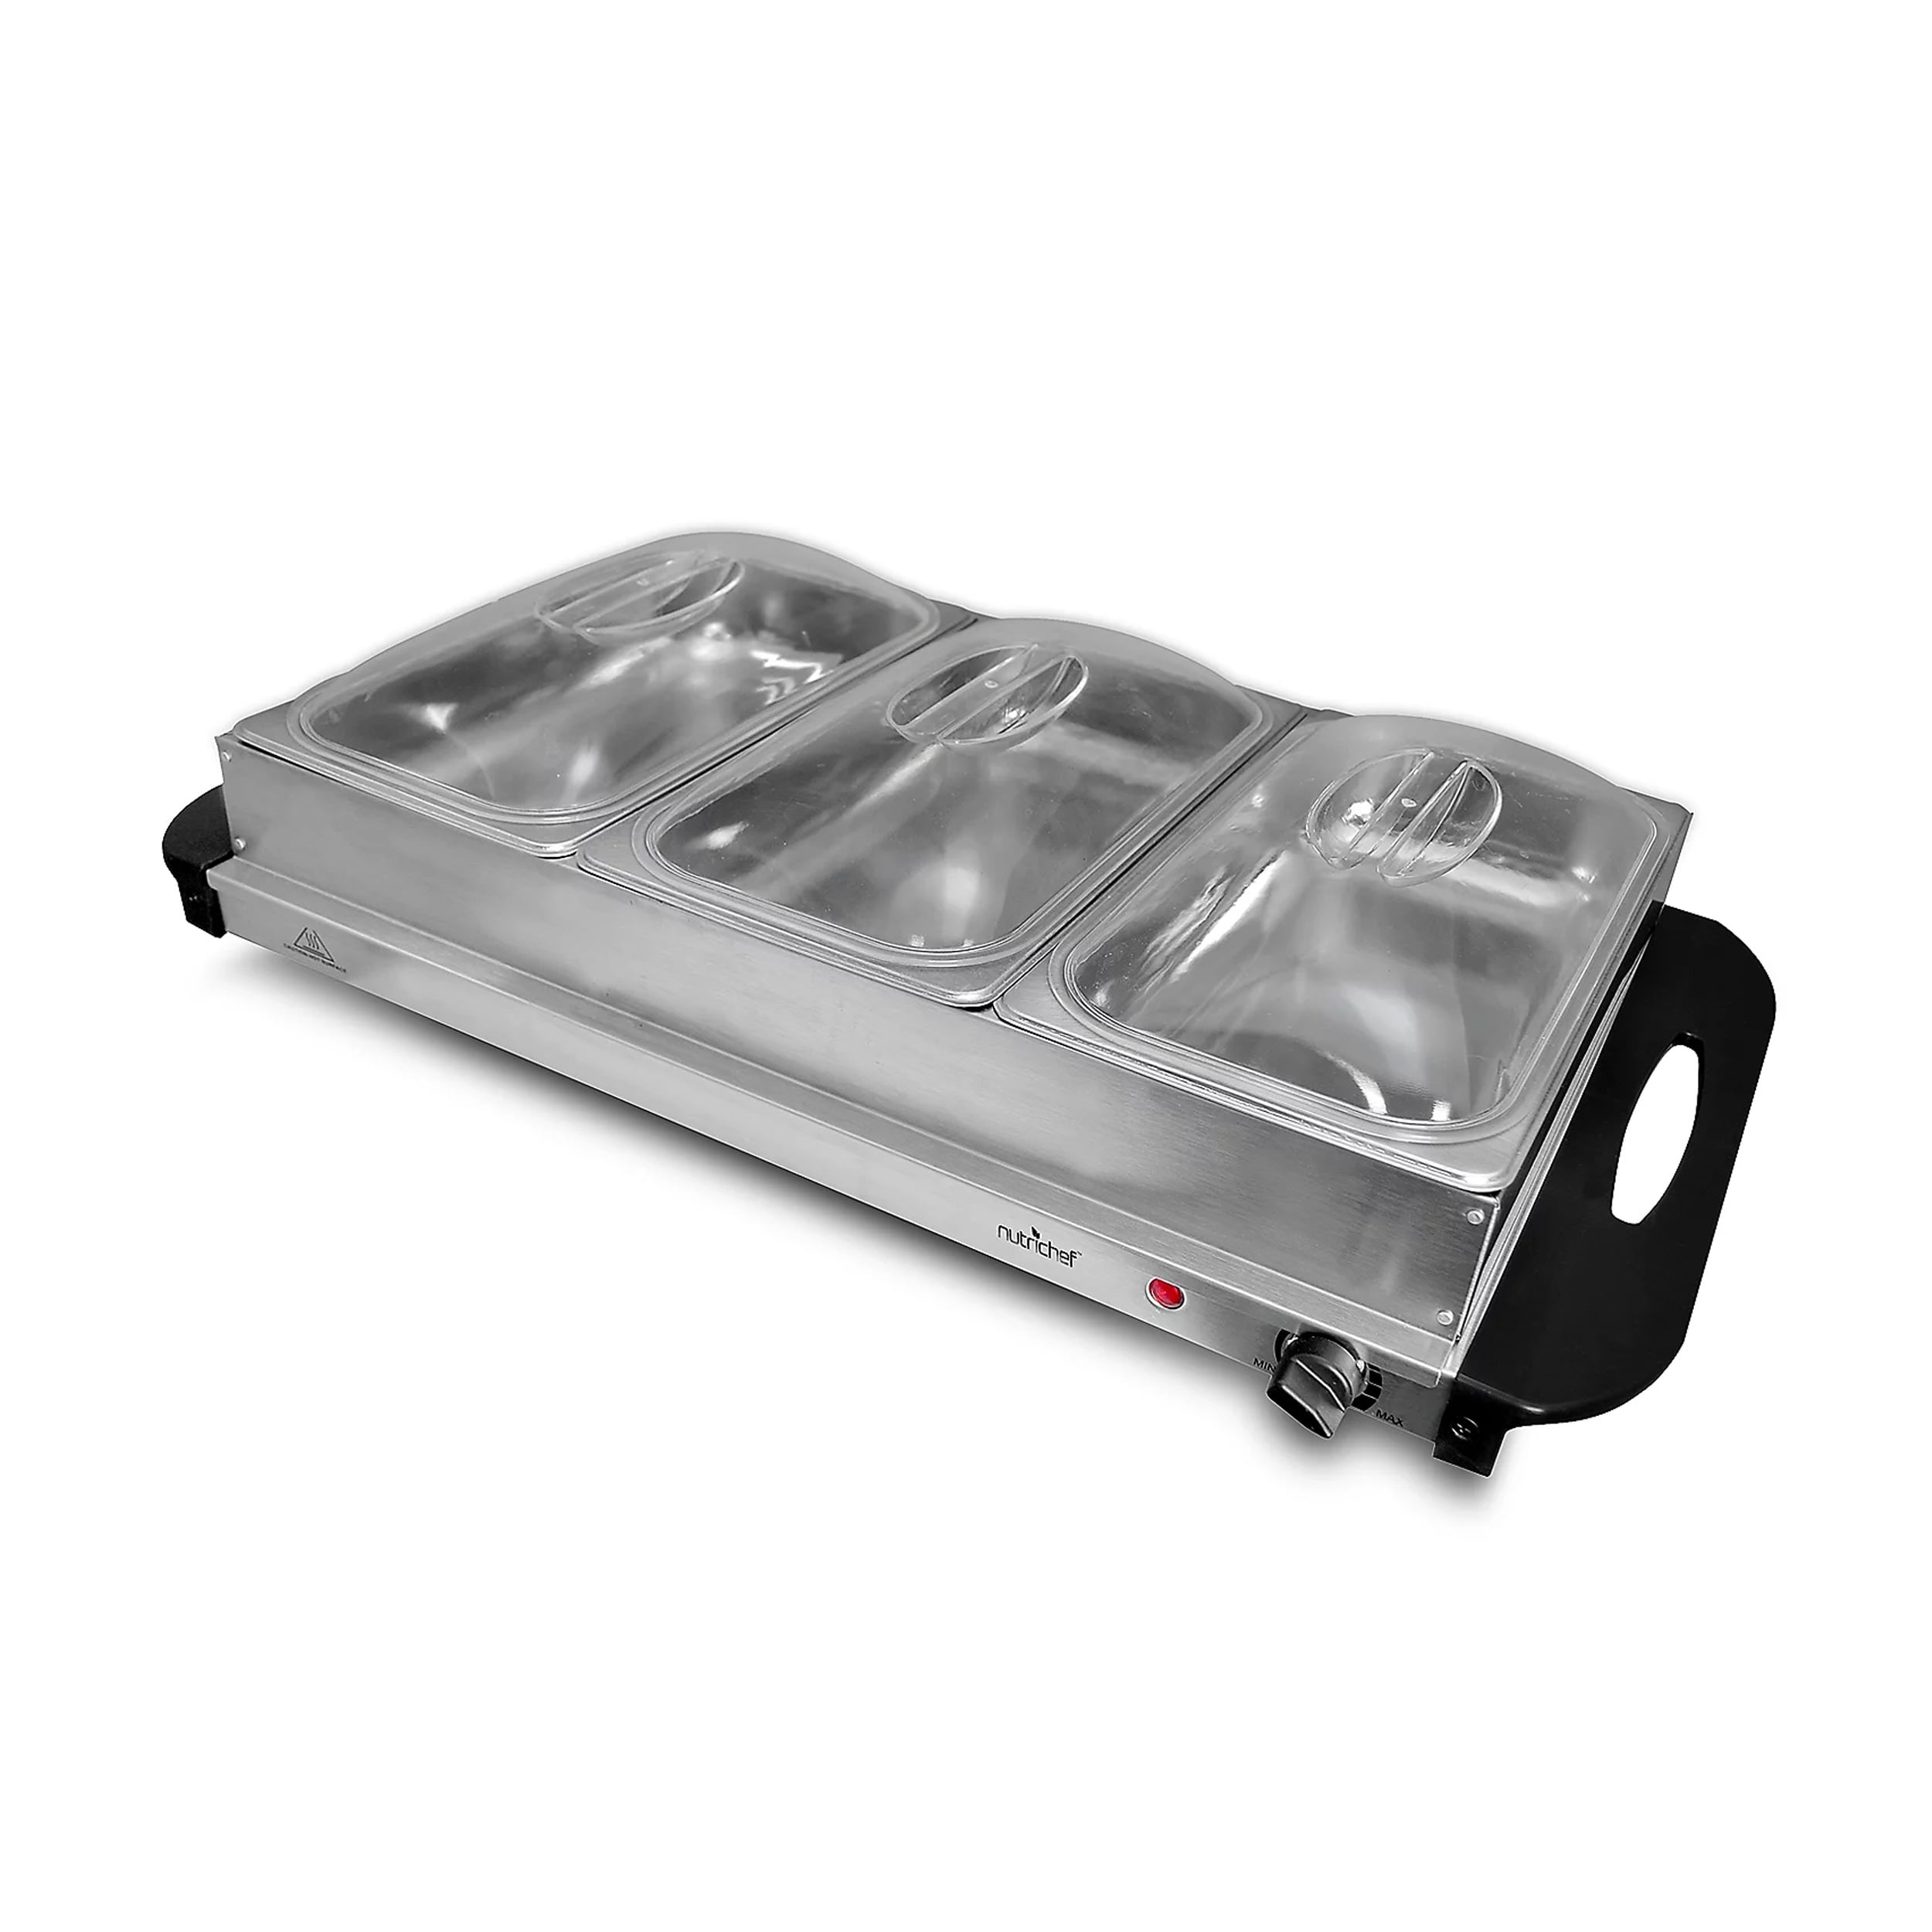 Stainless Steel Warming Hot Plate - Keep Food Warm w/ Portable Electric Food  Tray Dish Warmer w/ Black Glass Top, For Restaurant, Parties, Buffet  Serving, Table or Countertop Use - NutriChef AZPKWTR15 